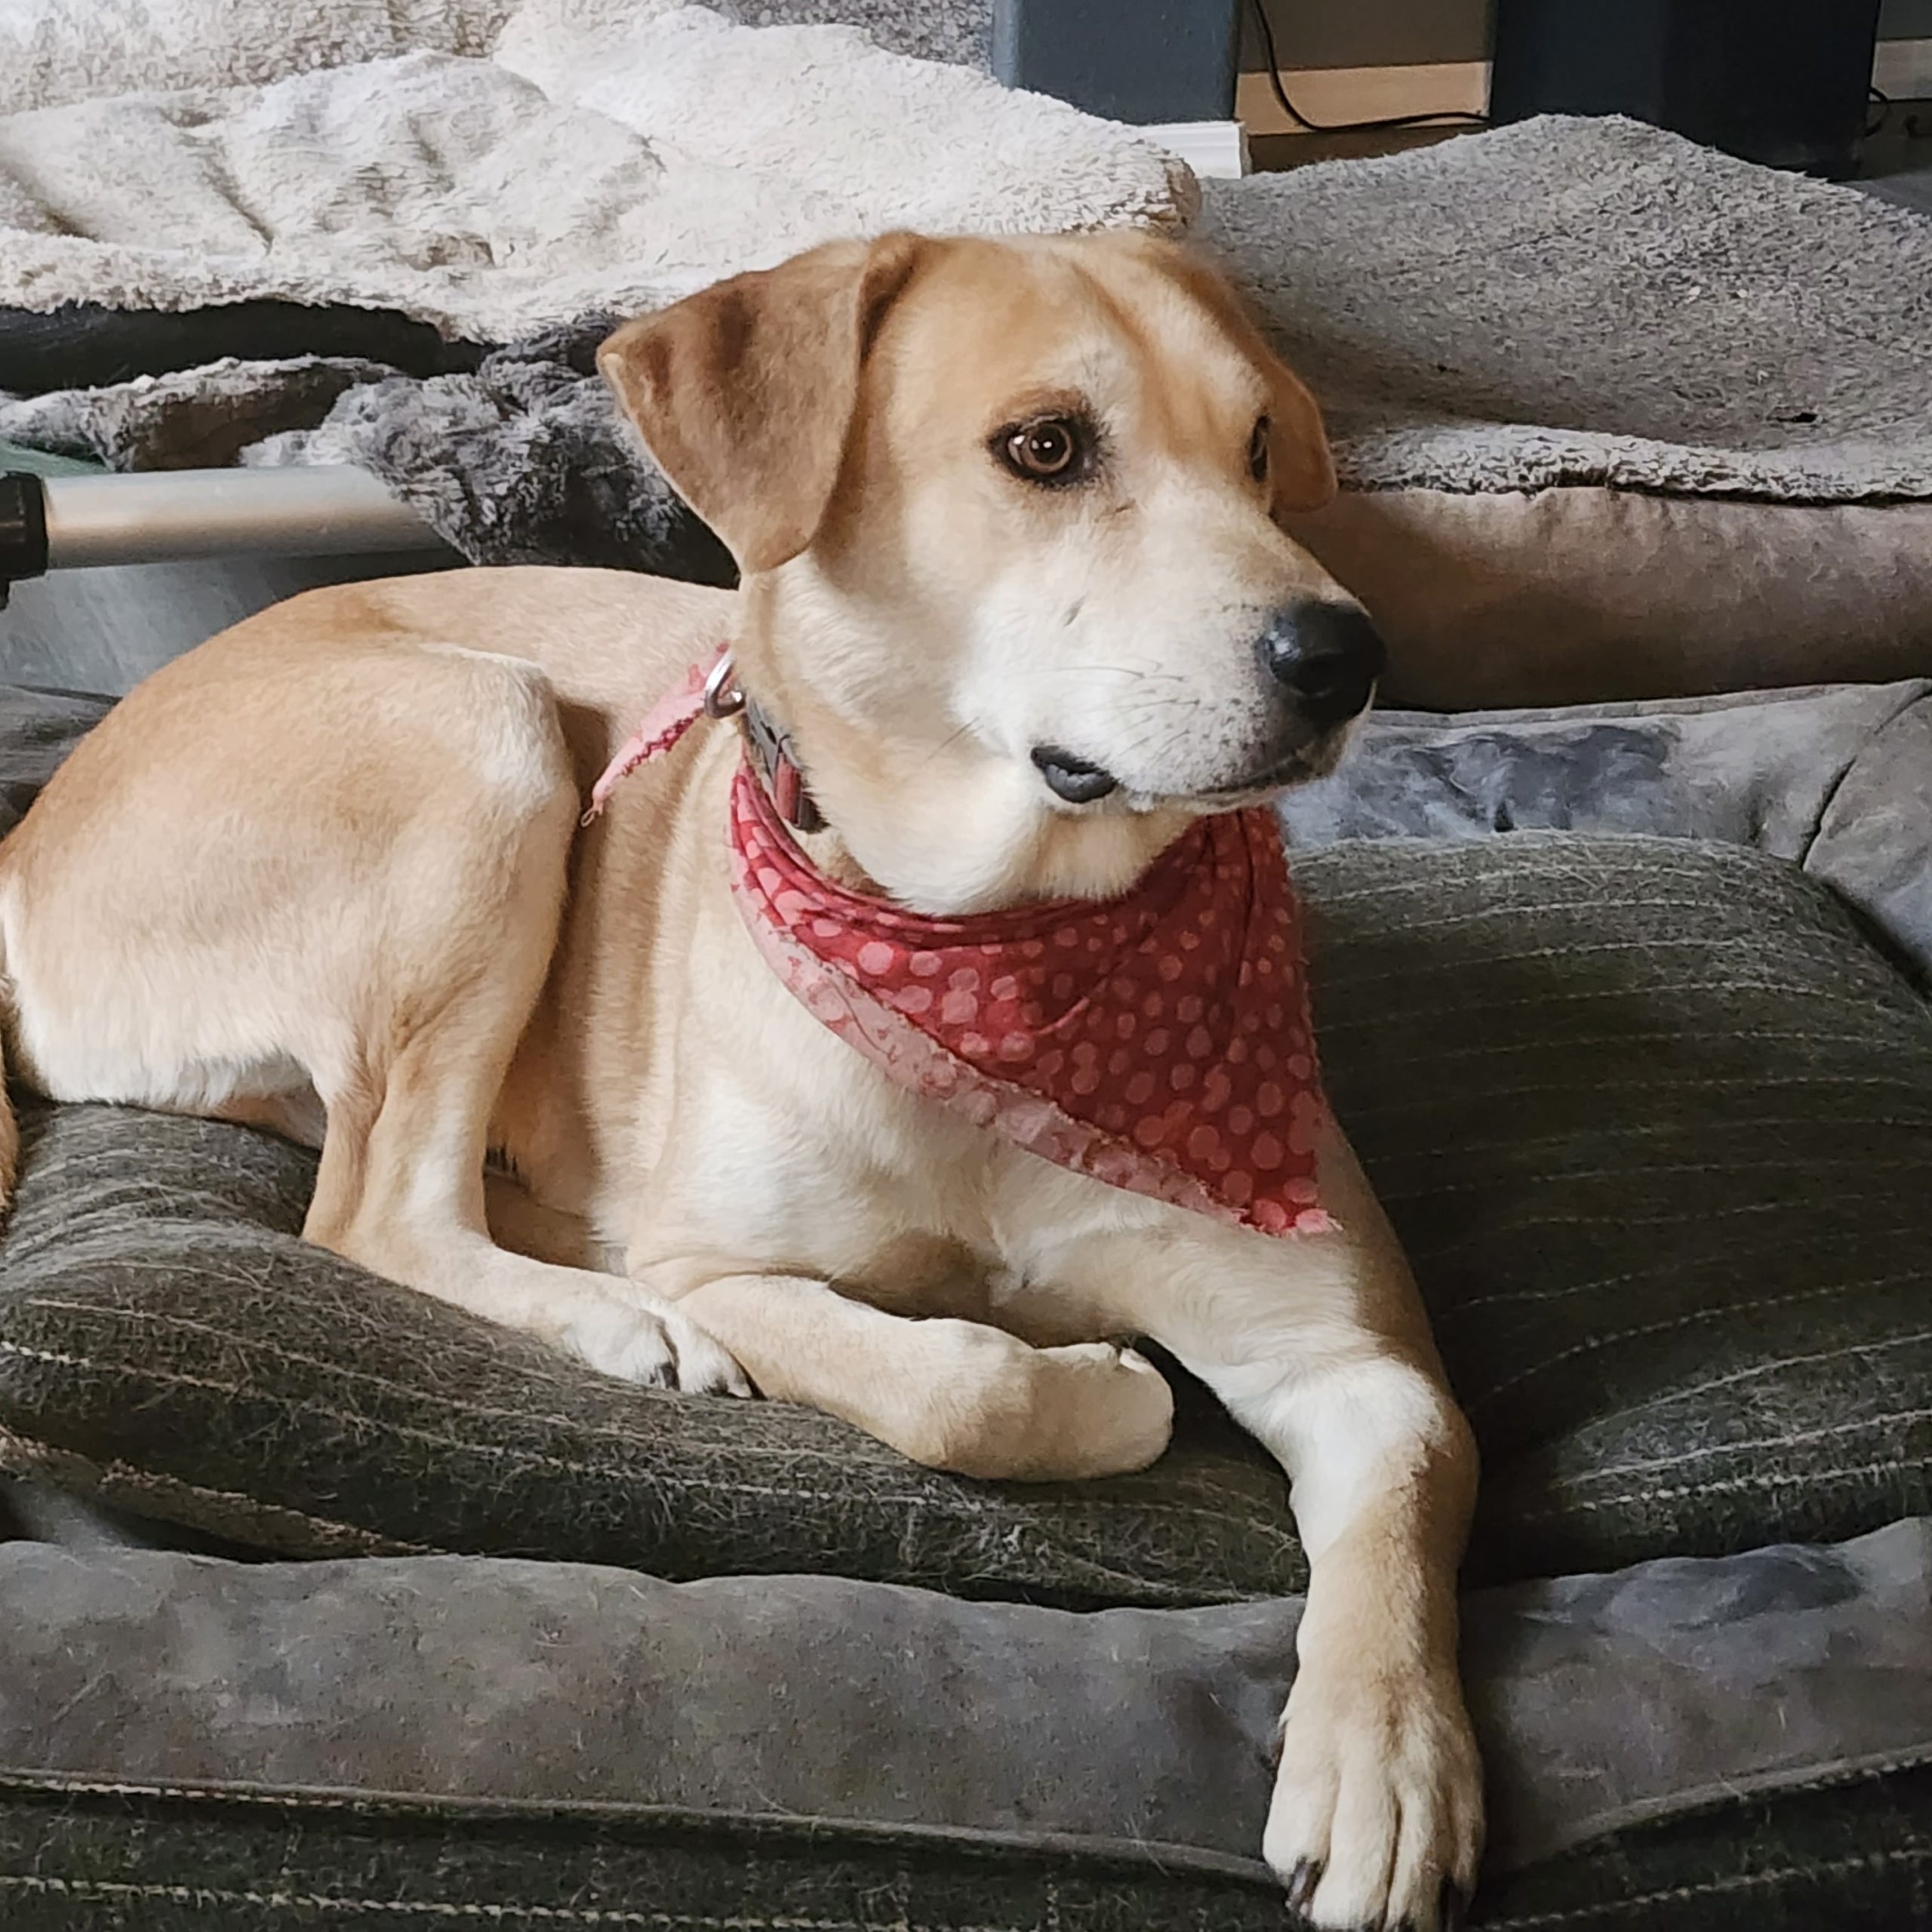 A photo of a very handsome yellow Labrador Retriever dog for adoption in Portland Oregon. Here he is wearing a red bandana and looking very spiffy.